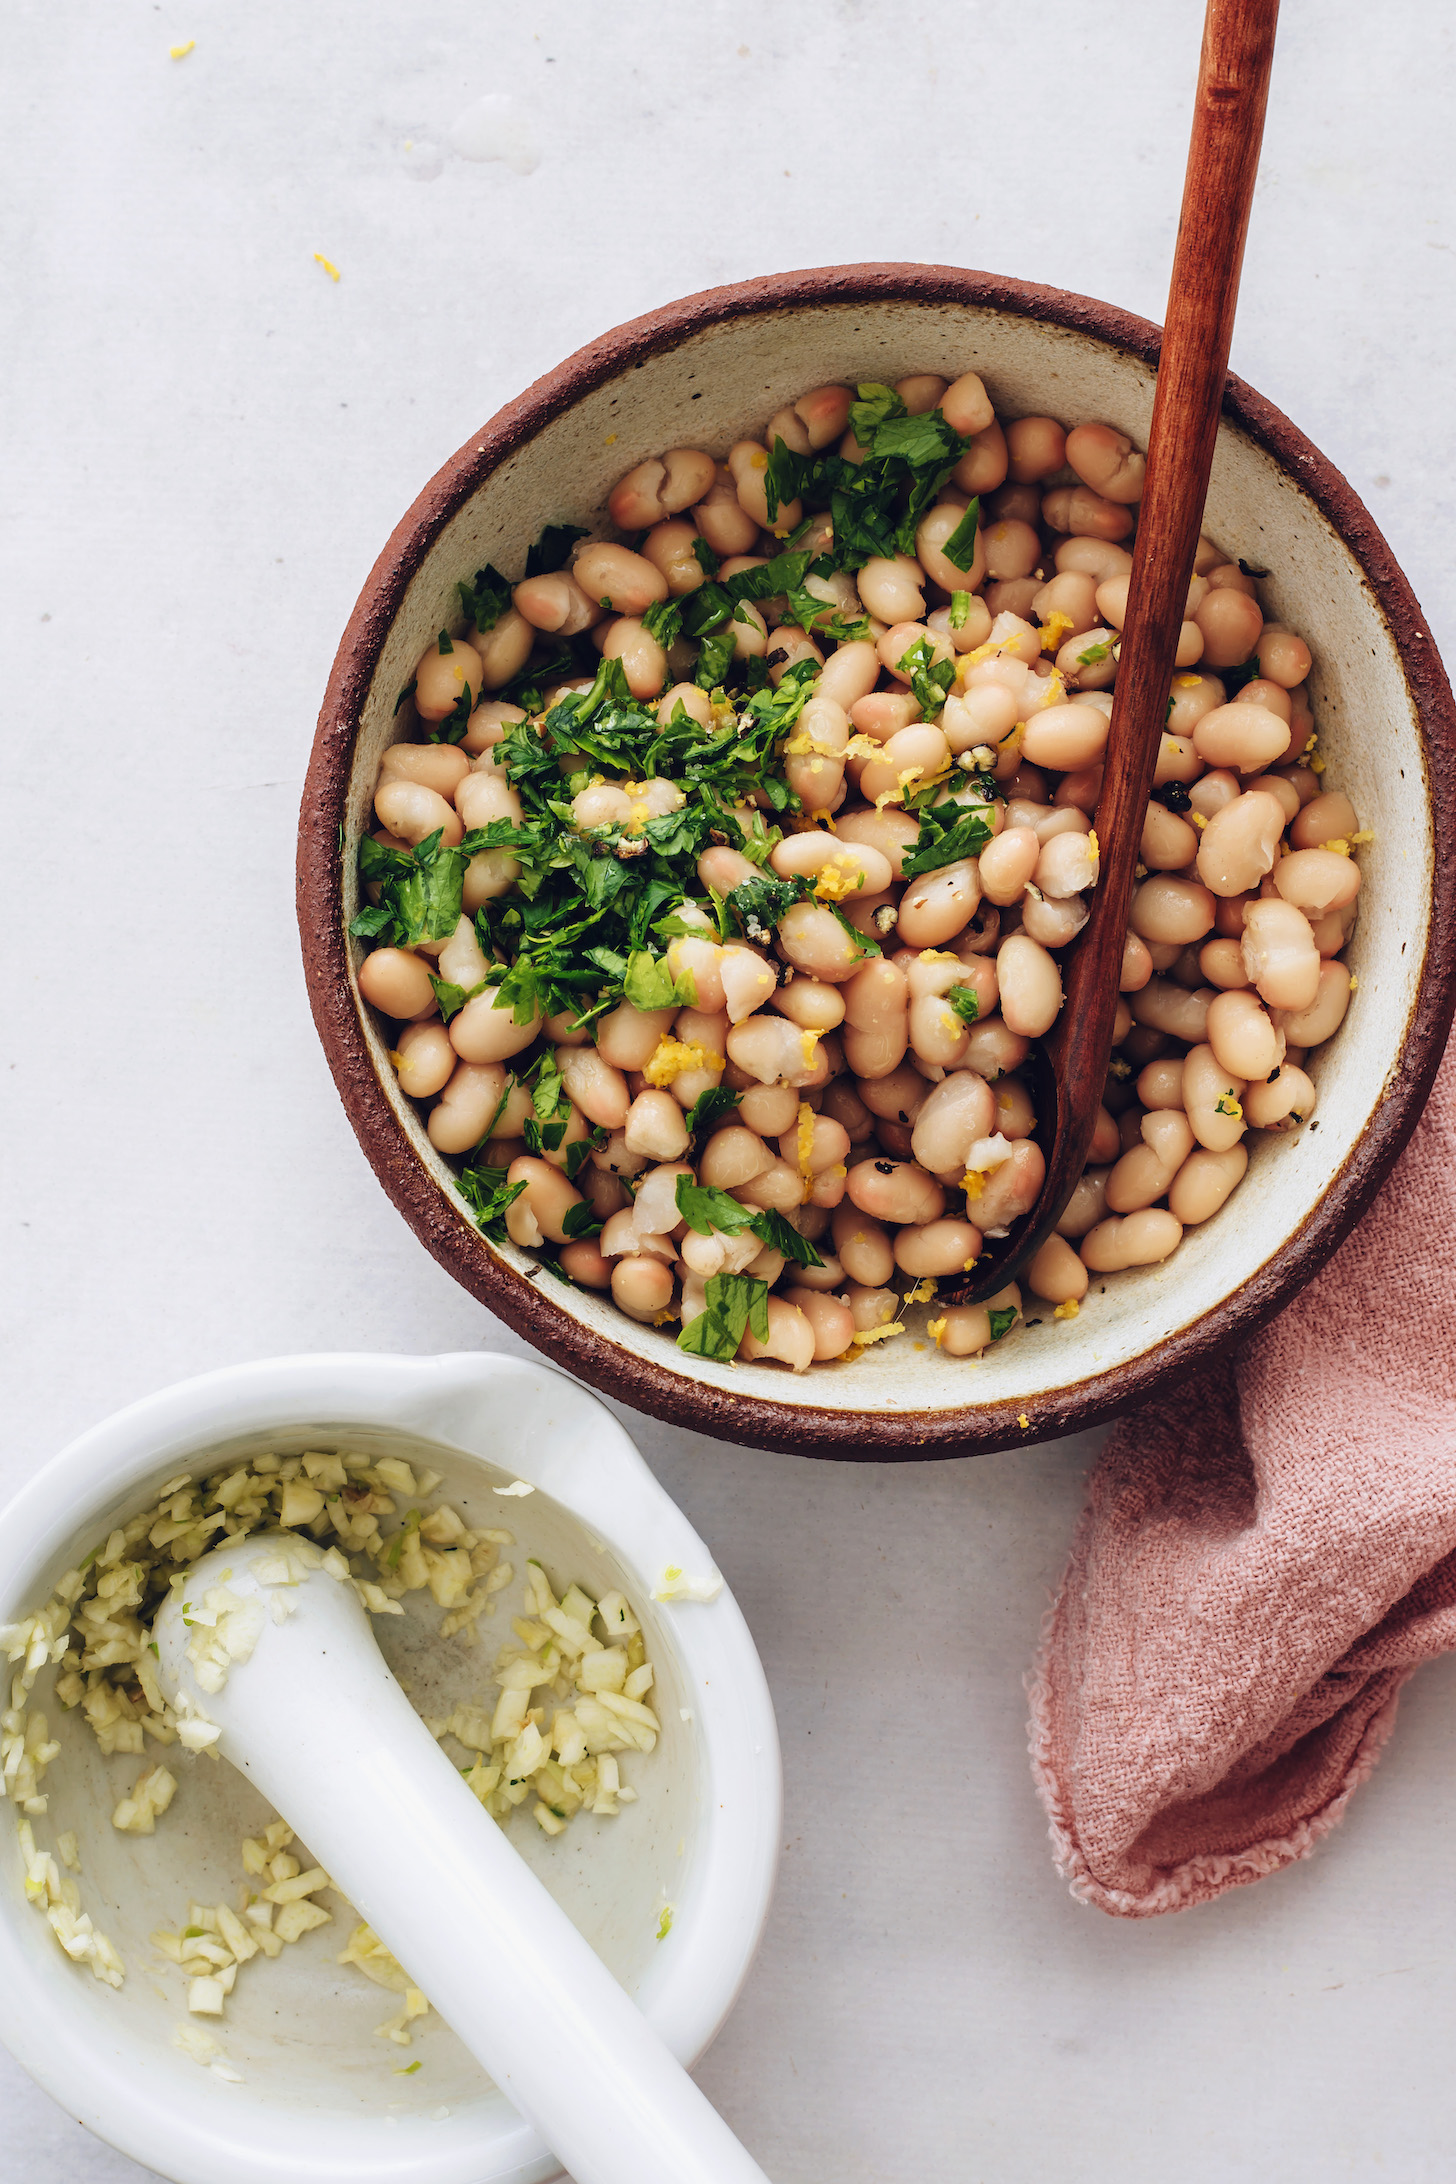 Bowls of minced garlic and white beans with parsley and lemon zest